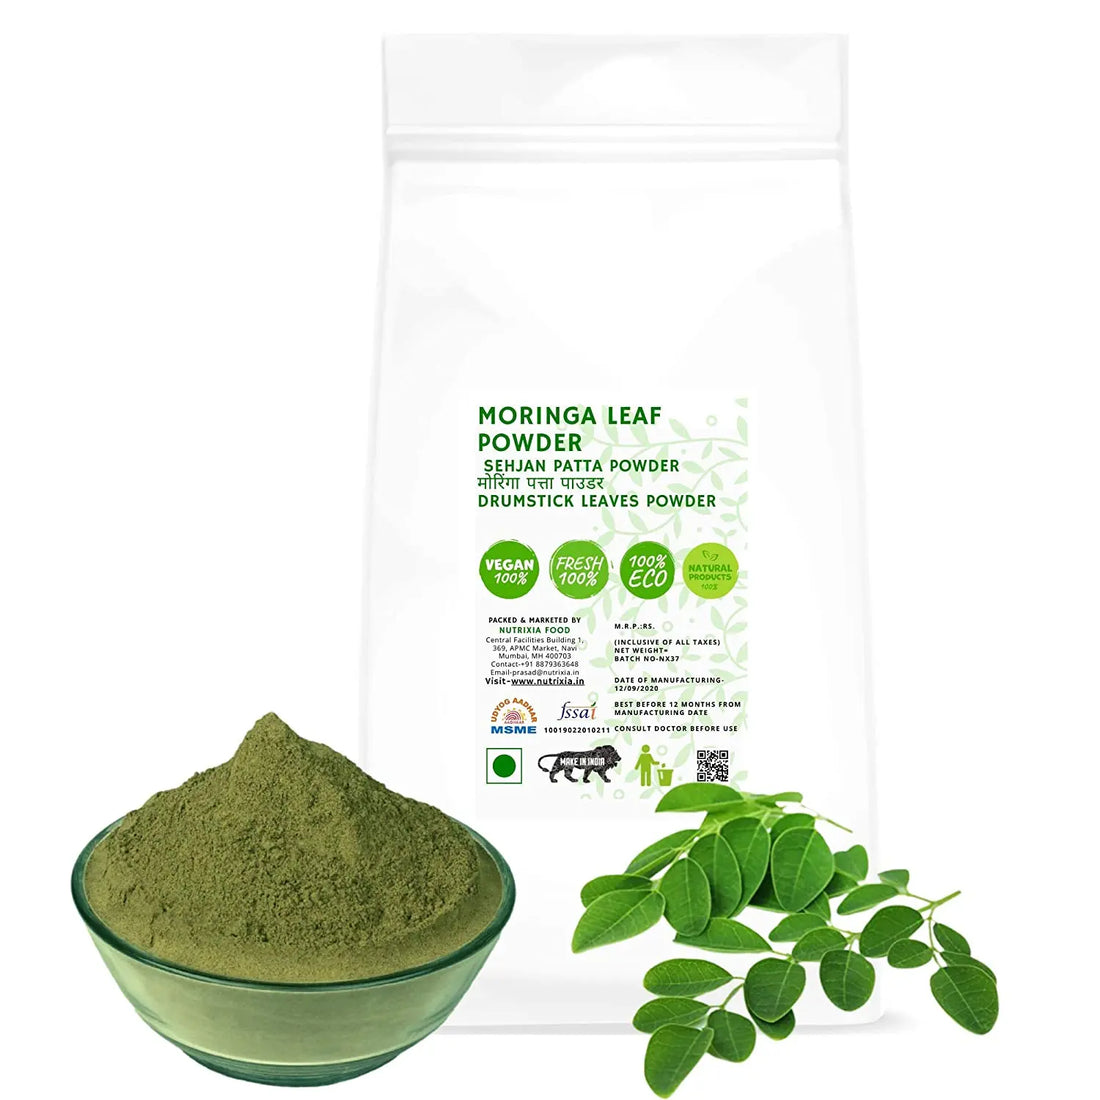 what are benefits of moringa leaf powder and what are step by step homemade remedies for treating different diseases ? Nutrixia Food